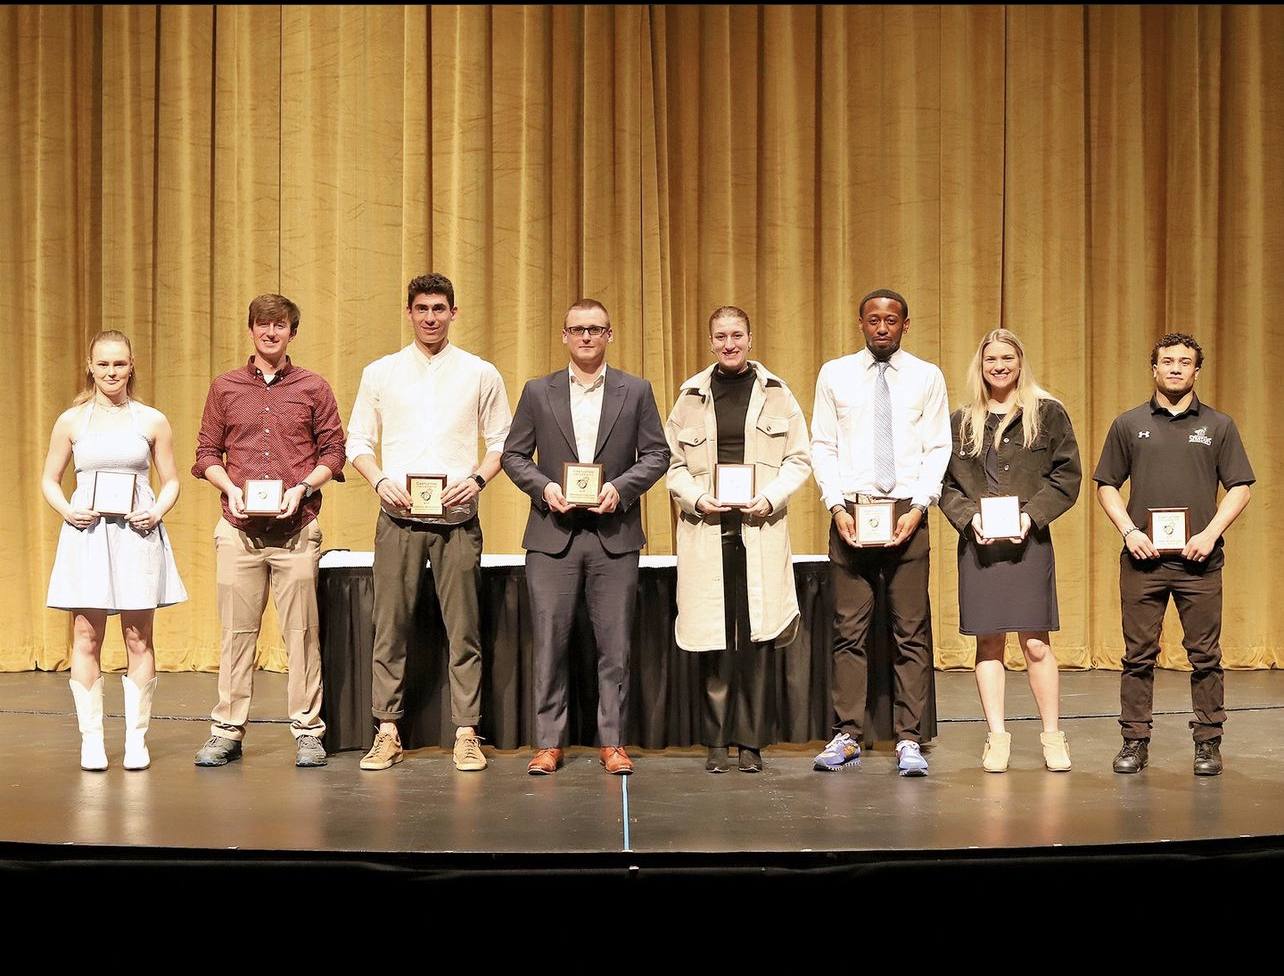 Winter sports celebrated at banquet